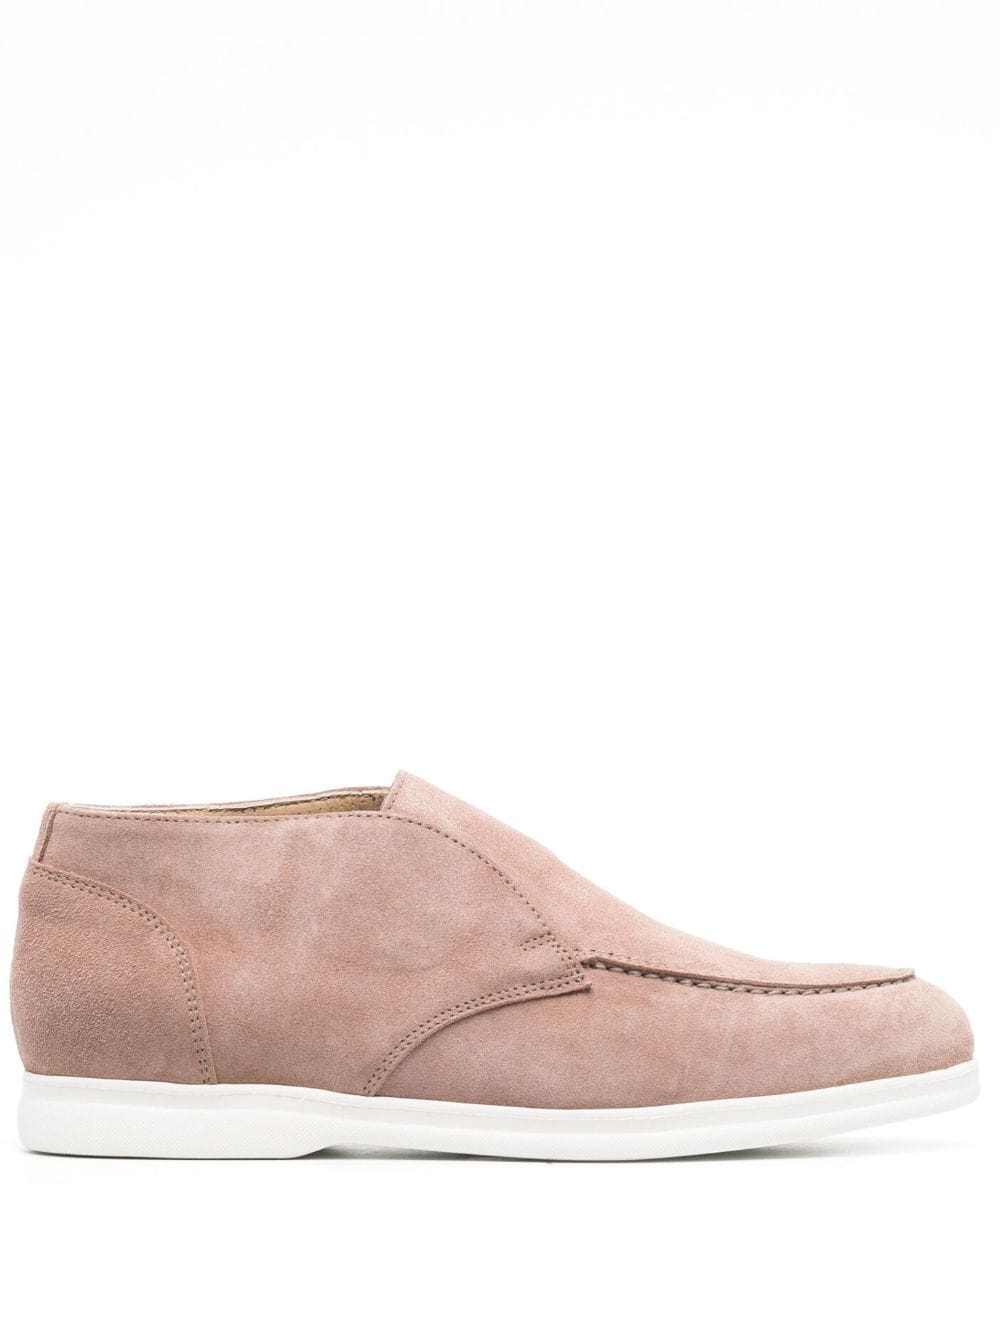 Doucal's ankle-length suede loafers - Pink von Doucal's